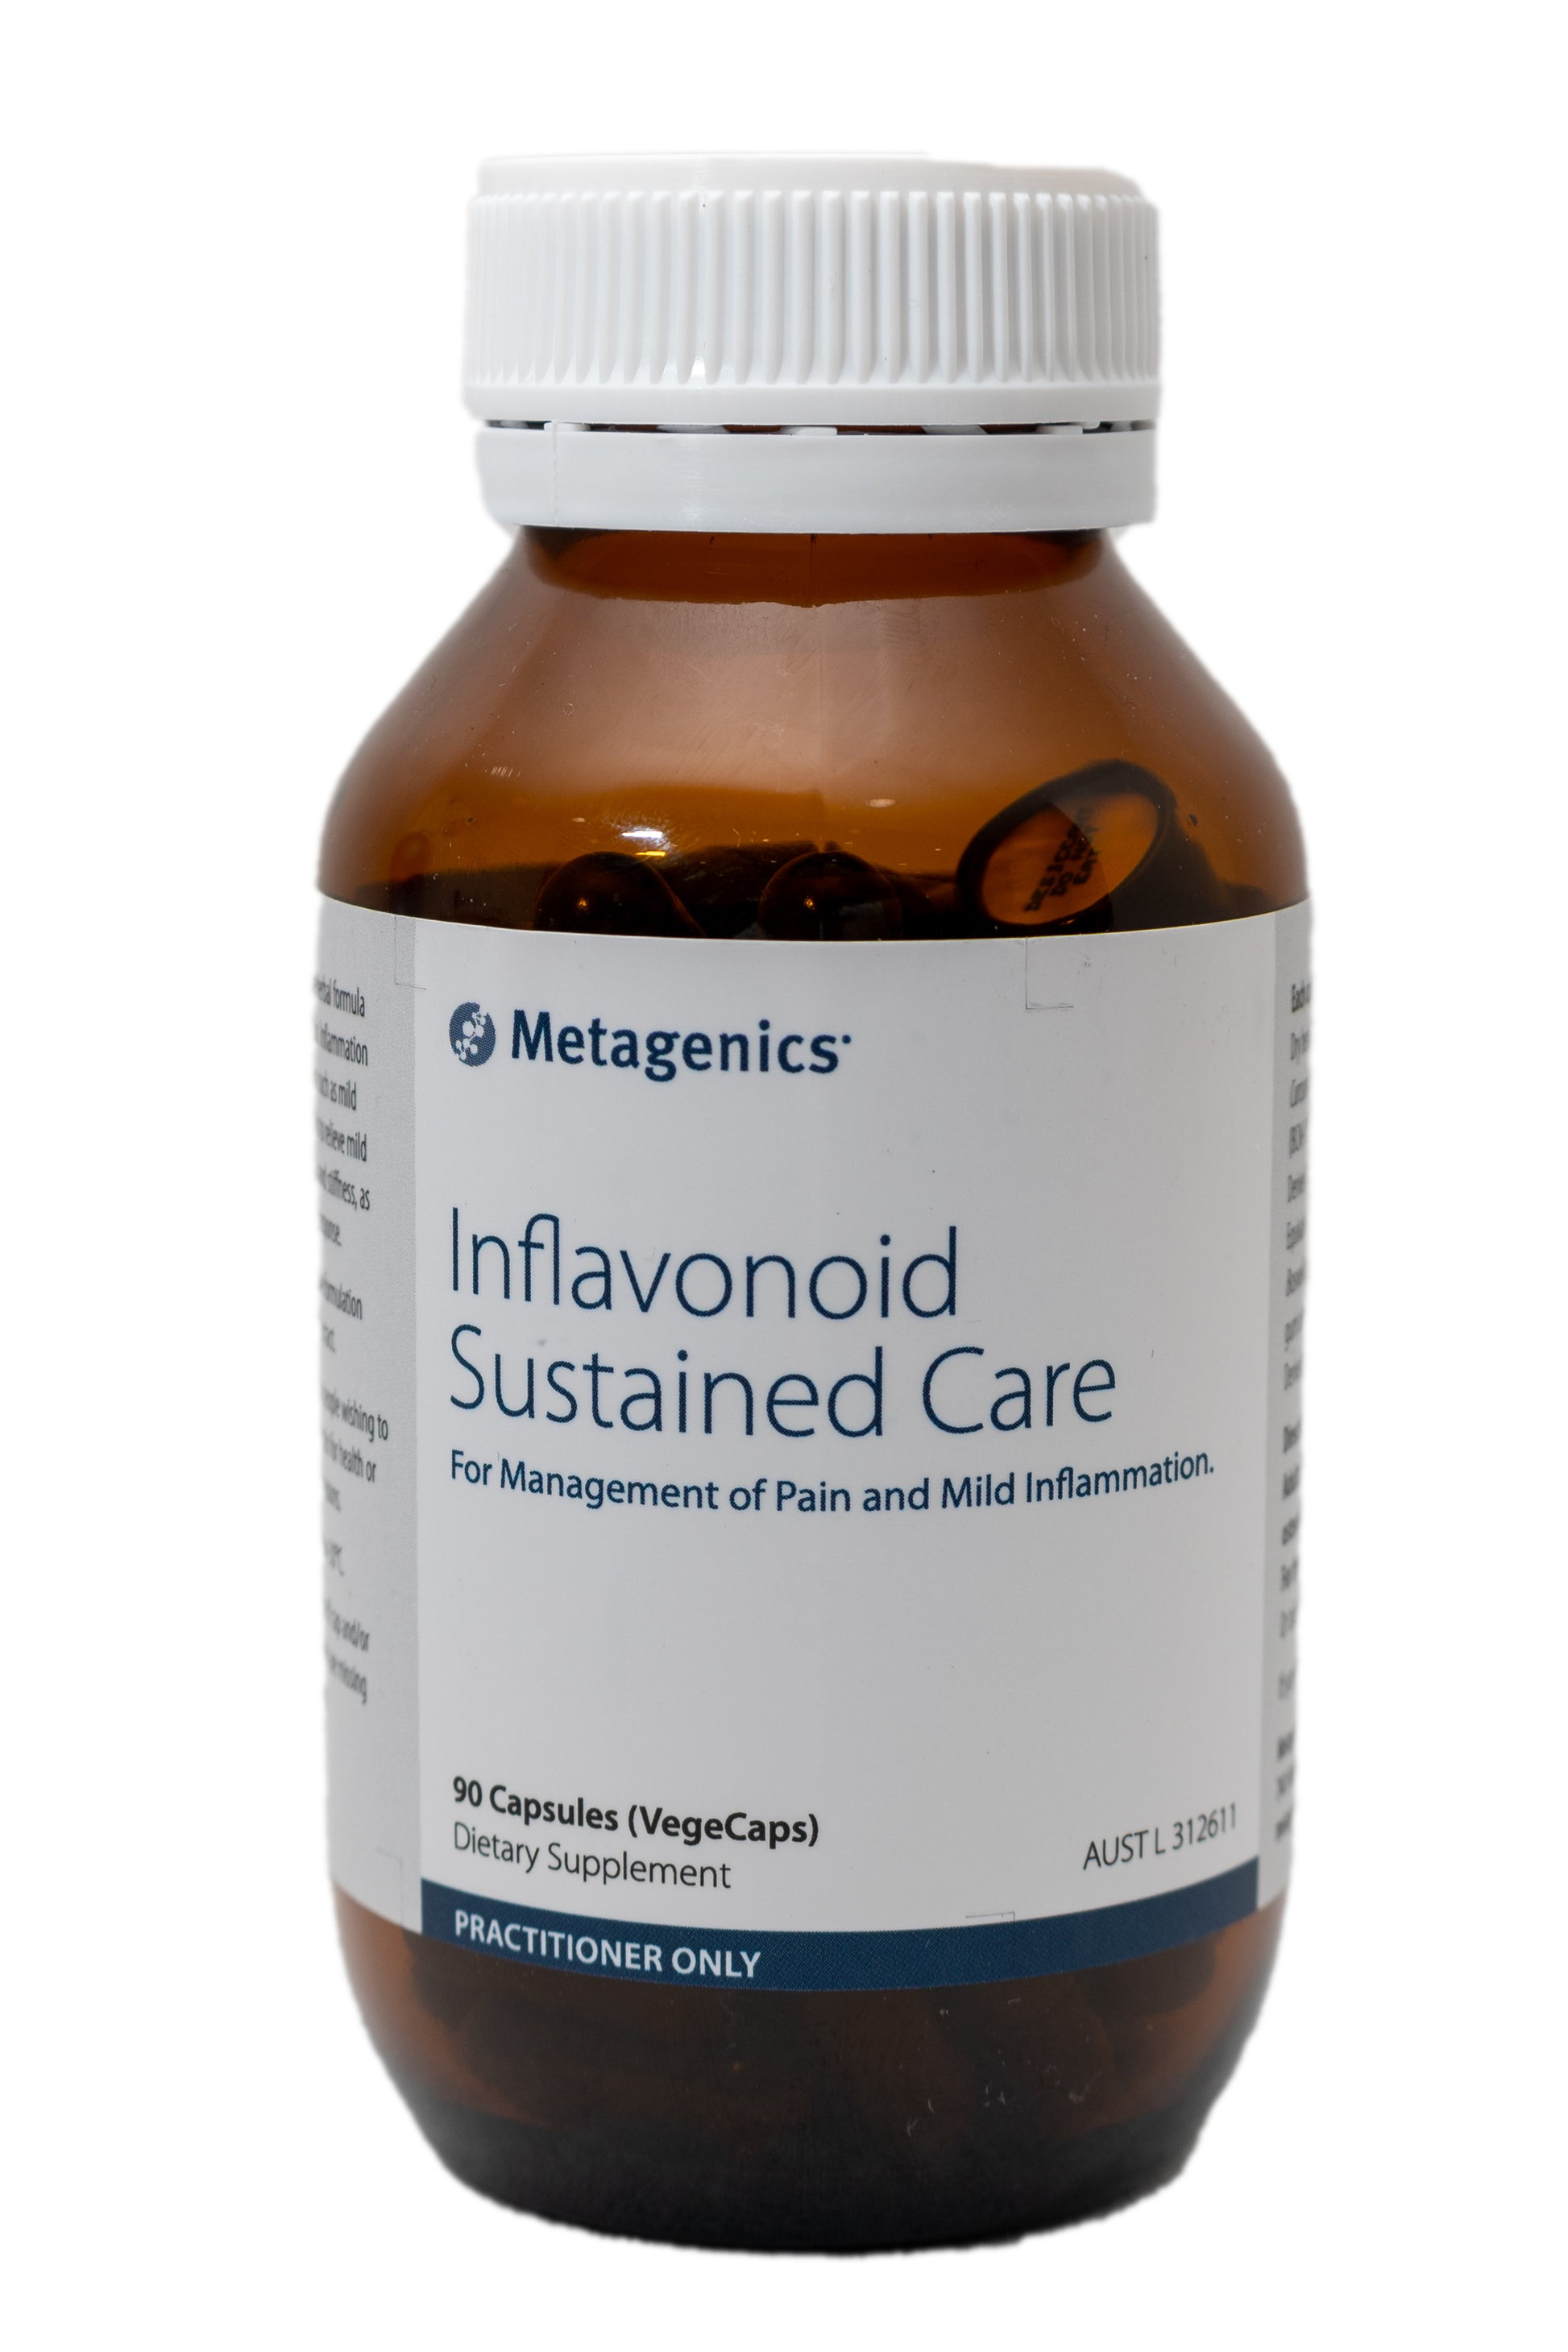 Metagenics Inflavonoid Sustained Care 90 Tablets